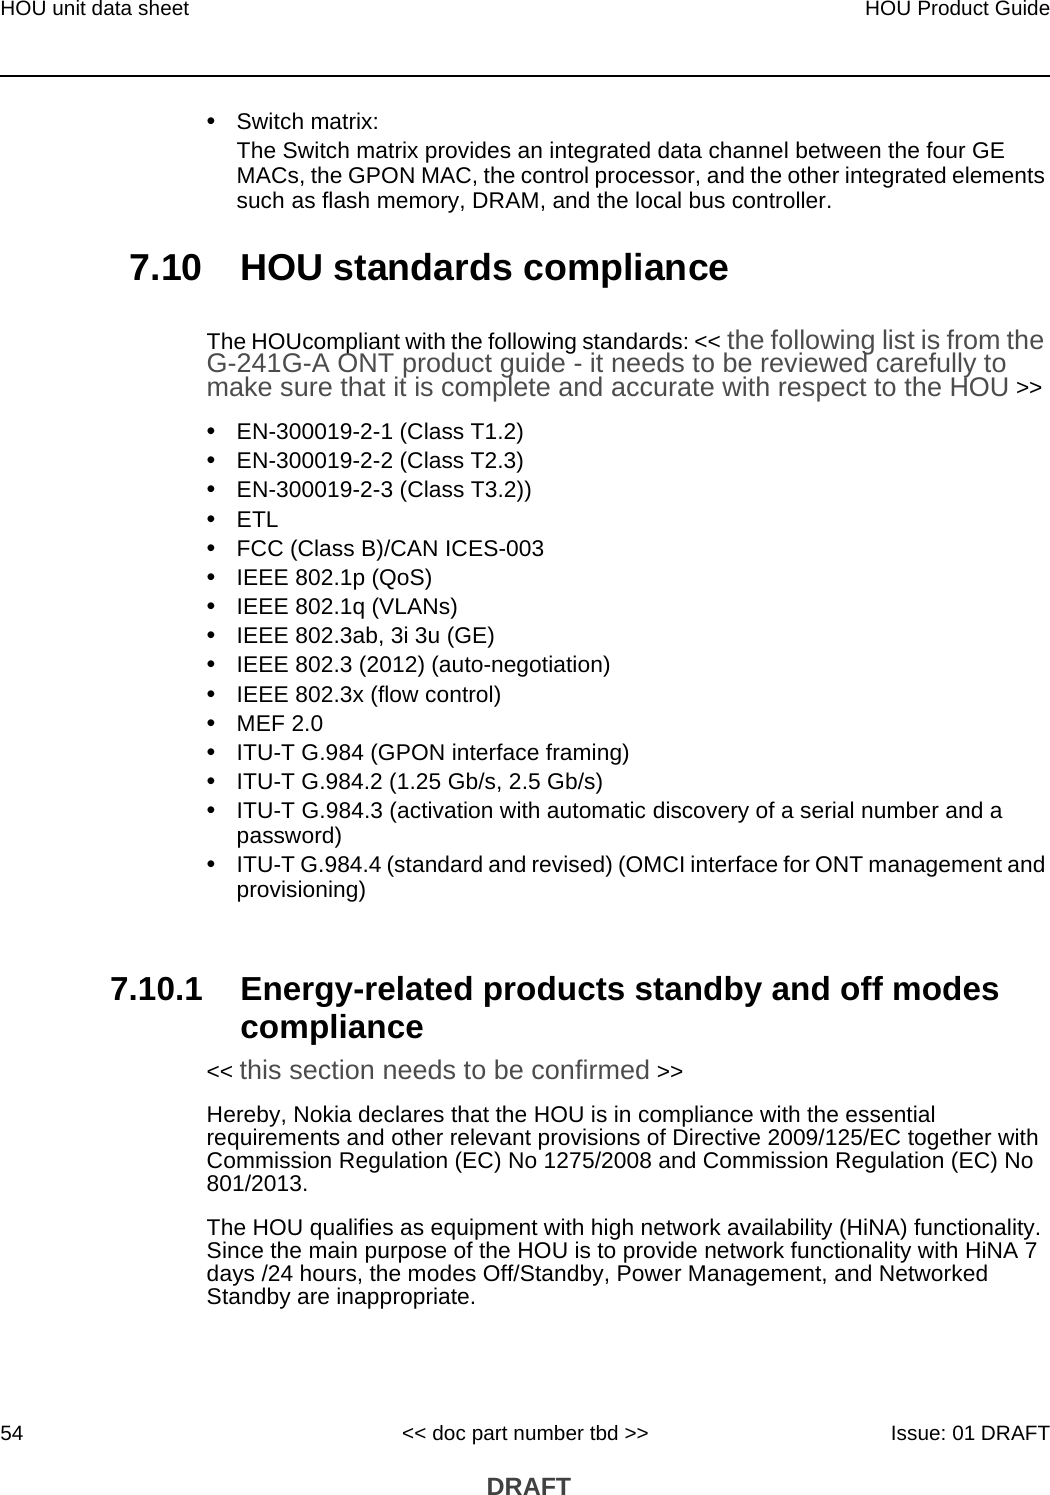 HOU unit data sheet54HOU Product Guide&lt;&lt; doc part number tbd &gt;&gt; Issue: 01 DRAFT DRAFT•Switch matrix:The Switch matrix provides an integrated data channel between the four GE MACs, the GPON MAC, the control processor, and the other integrated elements such as flash memory, DRAM, and the local bus controller.7.10 HOU standards complianceThe HOUcompliant with the following standards: &lt;&lt; the following list is from the G-241G-A ONT product guide - it needs to be reviewed carefully to make sure that it is complete and accurate with respect to the HOU &gt;&gt; •EN-300019-2-1 (Class T1.2)•EN-300019-2-2 (Class T2.3)•EN-300019-2-3 (Class T3.2))•ETL•FCC (Class B)/CAN ICES-003•IEEE 802.1p (QoS)•IEEE 802.1q (VLANs)•IEEE 802.3ab, 3i 3u (GE)•IEEE 802.3 (2012) (auto-negotiation)•IEEE 802.3x (flow control)•MEF 2.0•ITU-T G.984 (GPON interface framing)•ITU-T G.984.2 (1.25 Gb/s, 2.5 Gb/s)•ITU-T G.984.3 (activation with automatic discovery of a serial number and a password)•ITU-T G.984.4 (standard and revised) (OMCI interface for ONT management and provisioning)7.10.1 Energy-related products standby and off modes compliance&lt;&lt; this section needs to be confirmed &gt;&gt;Hereby, Nokia declares that the HOU is in compliance with the essential requirements and other relevant provisions of Directive 2009/125/EC together with Commission Regulation (EC) No 1275/2008 and Commission Regulation (EC) No 801/2013. The HOU qualifies as equipment with high network availability (HiNA) functionality. Since the main purpose of the HOU is to provide network functionality with HiNA 7 days /24 hours, the modes Off/Standby, Power Management, and Networked Standby are inappropriate.